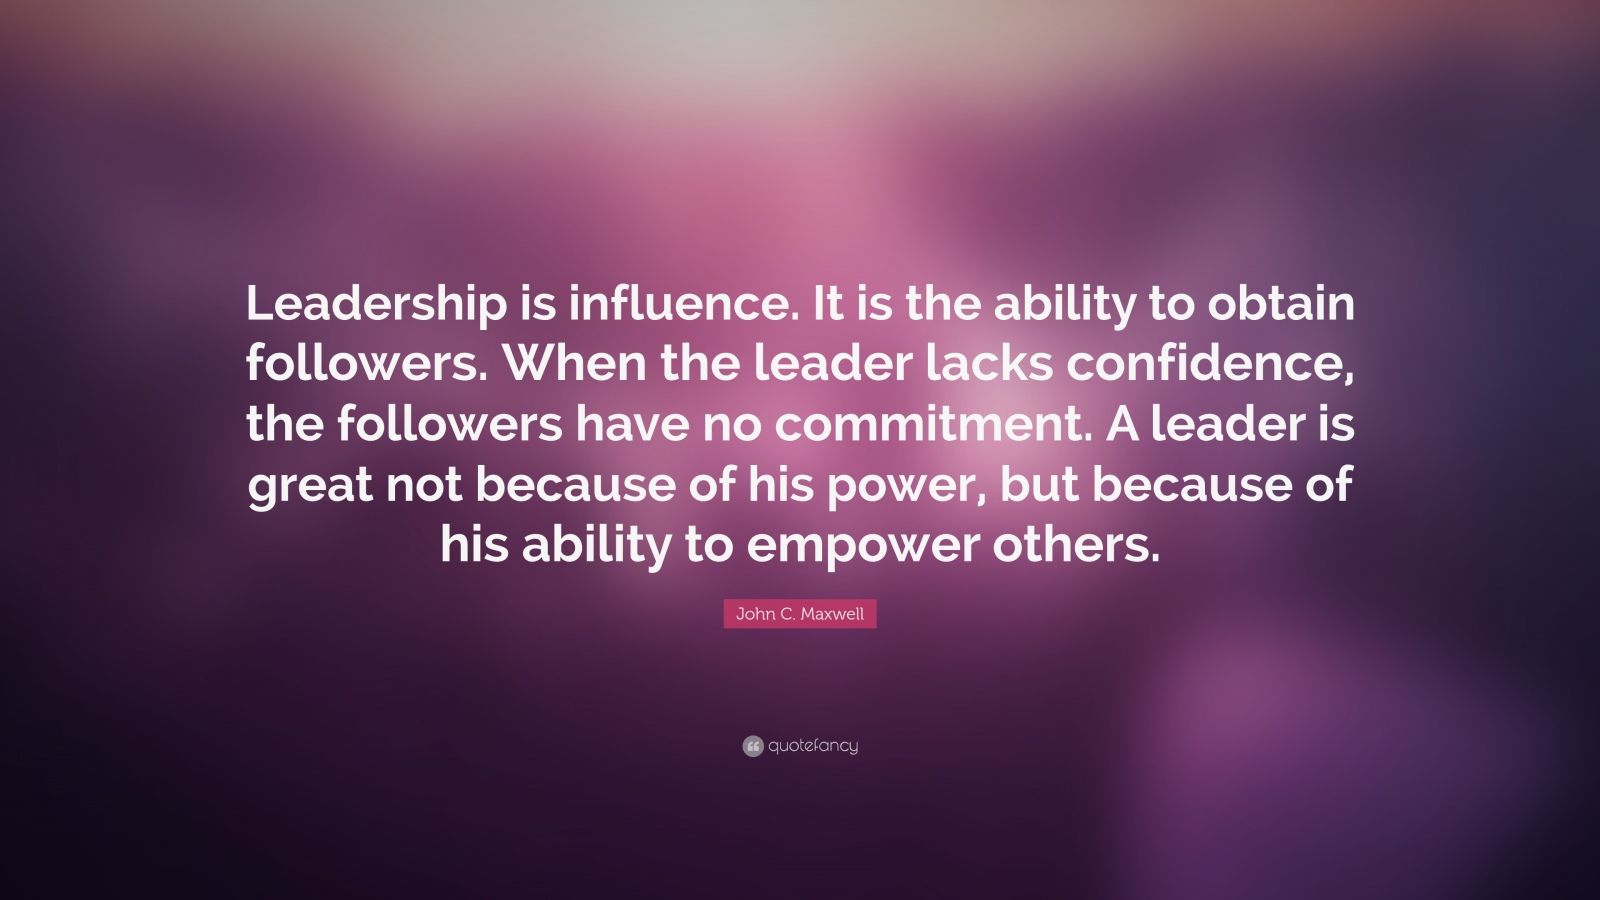 John C. Maxwell Quote: “Leadership is influence. It is the ability to